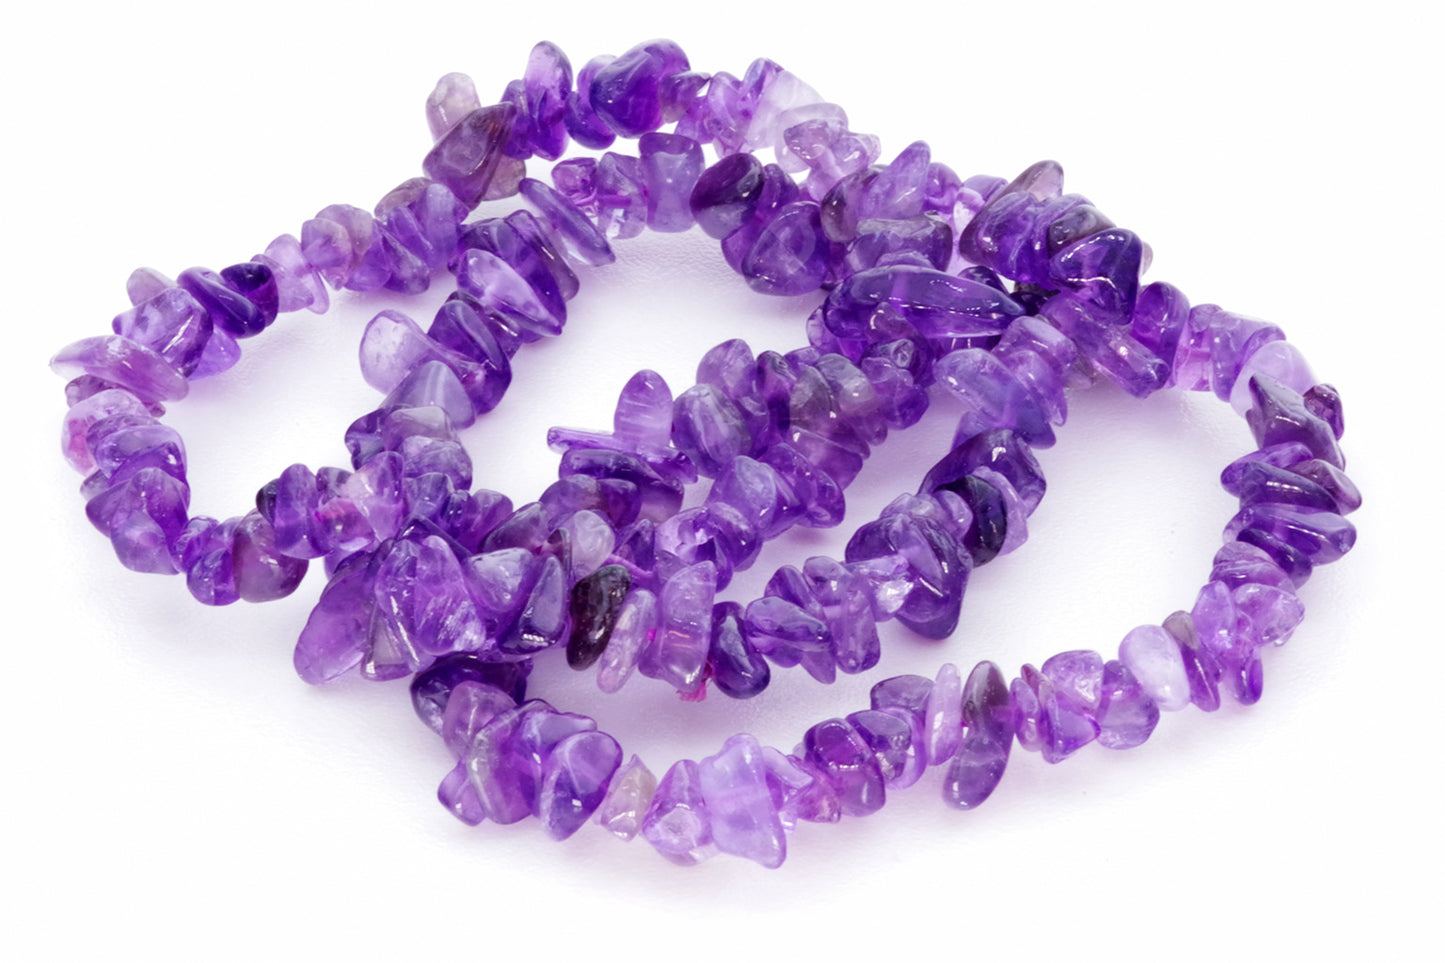 Amethyst-Armband – Chips